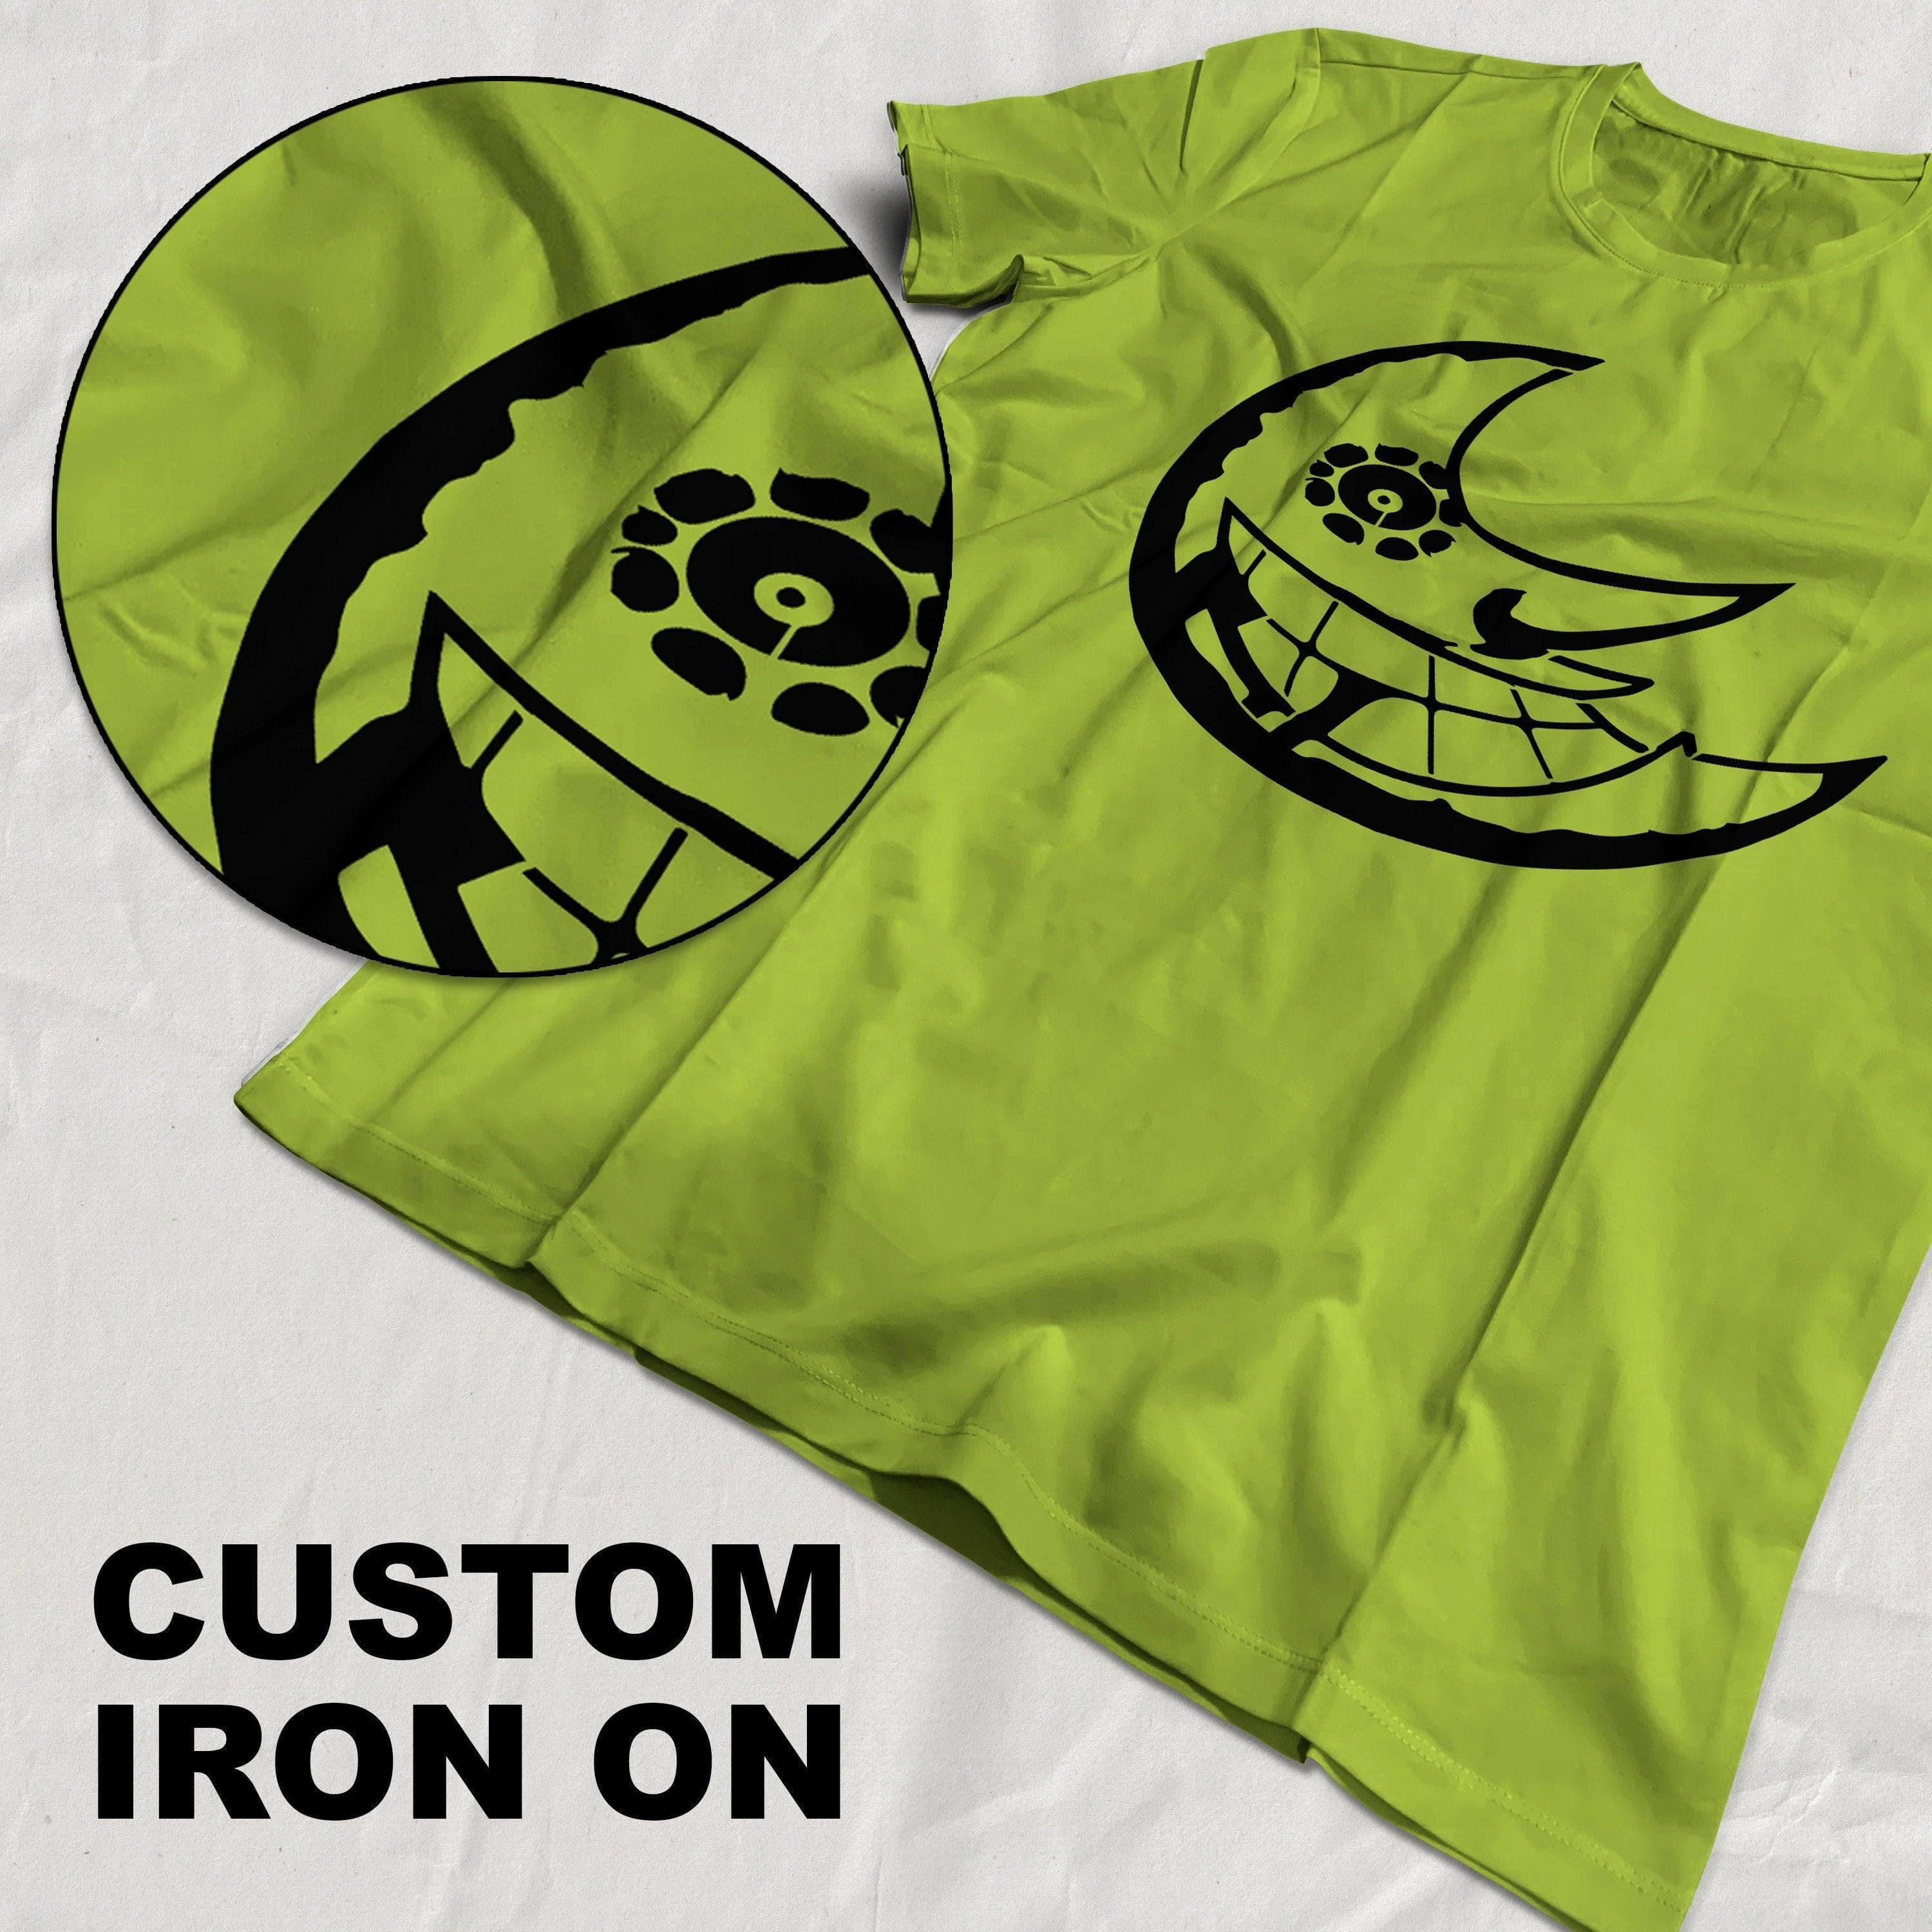 Iron On Vinyl - How To Easily Make Personalized Shirts